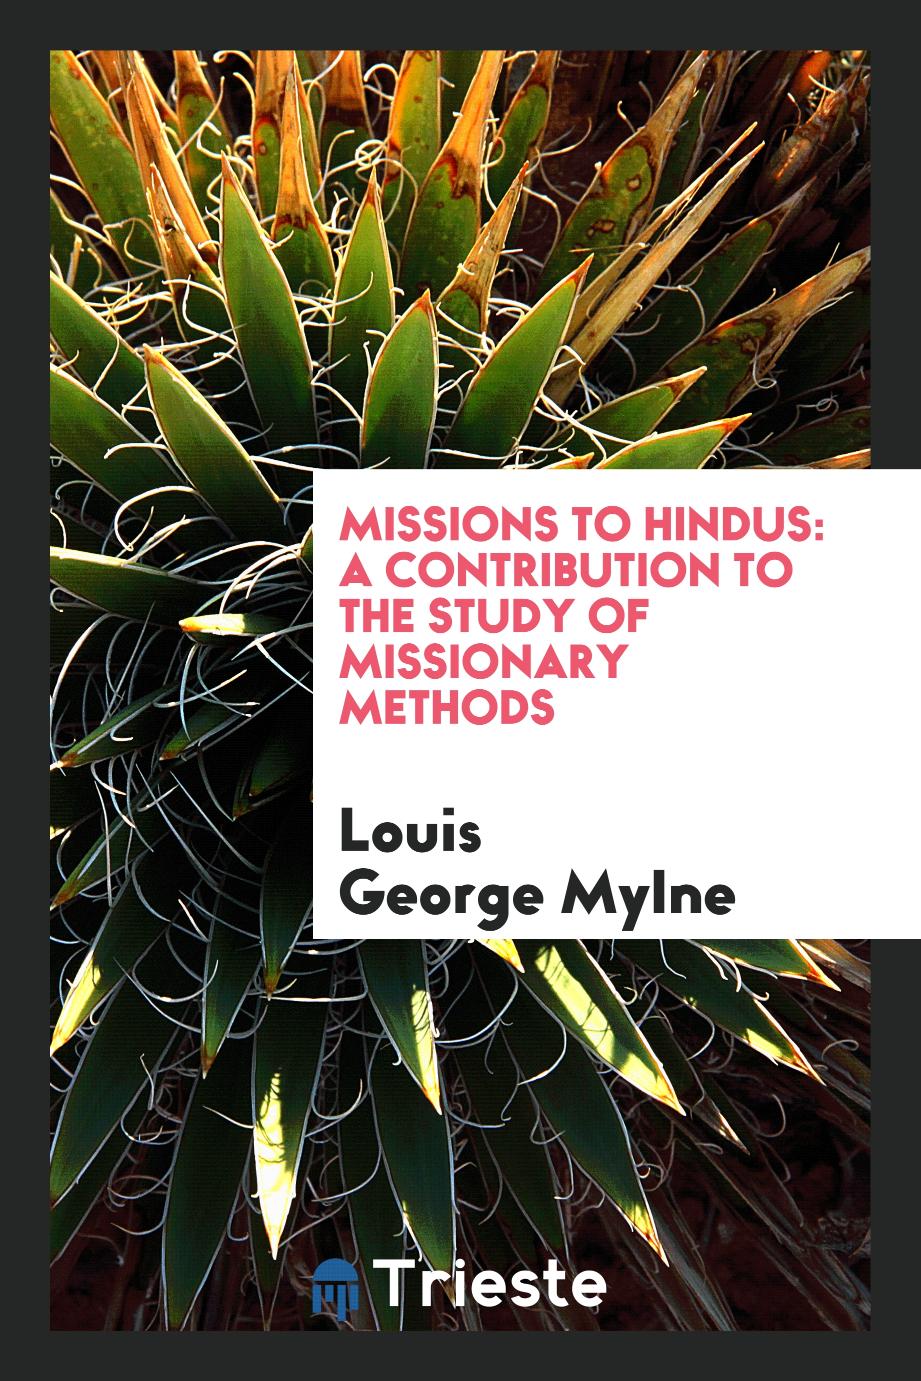 Missions to Hindus: a contribution to the study of missionary methods